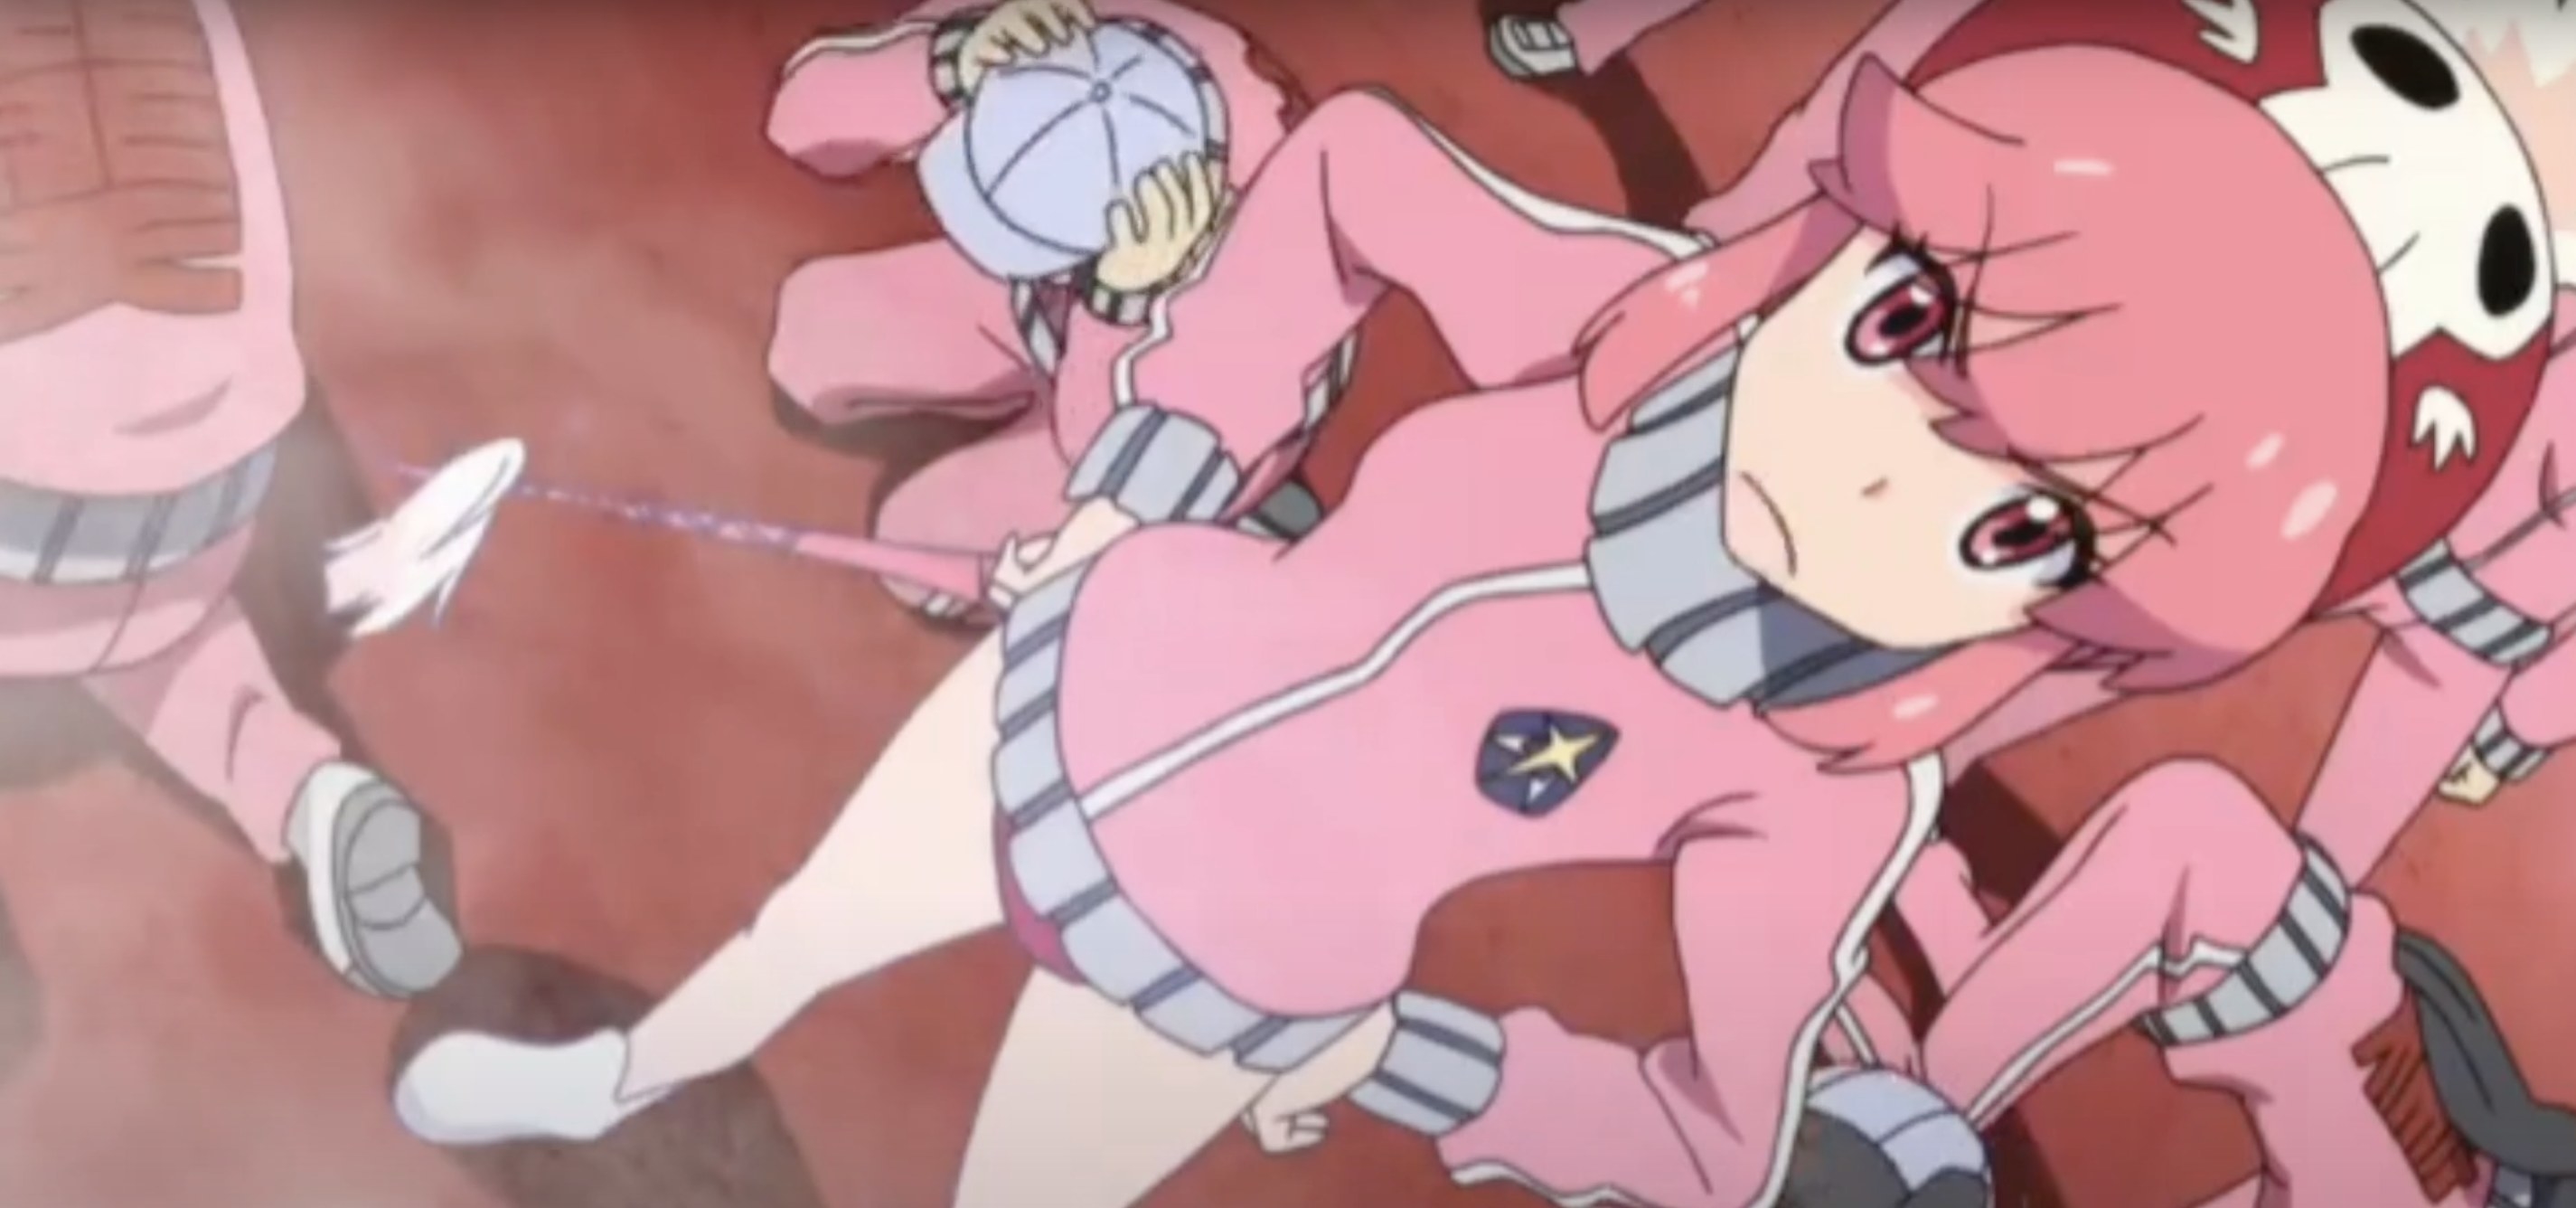 Nonon pouts as her minions cower in fear behind her